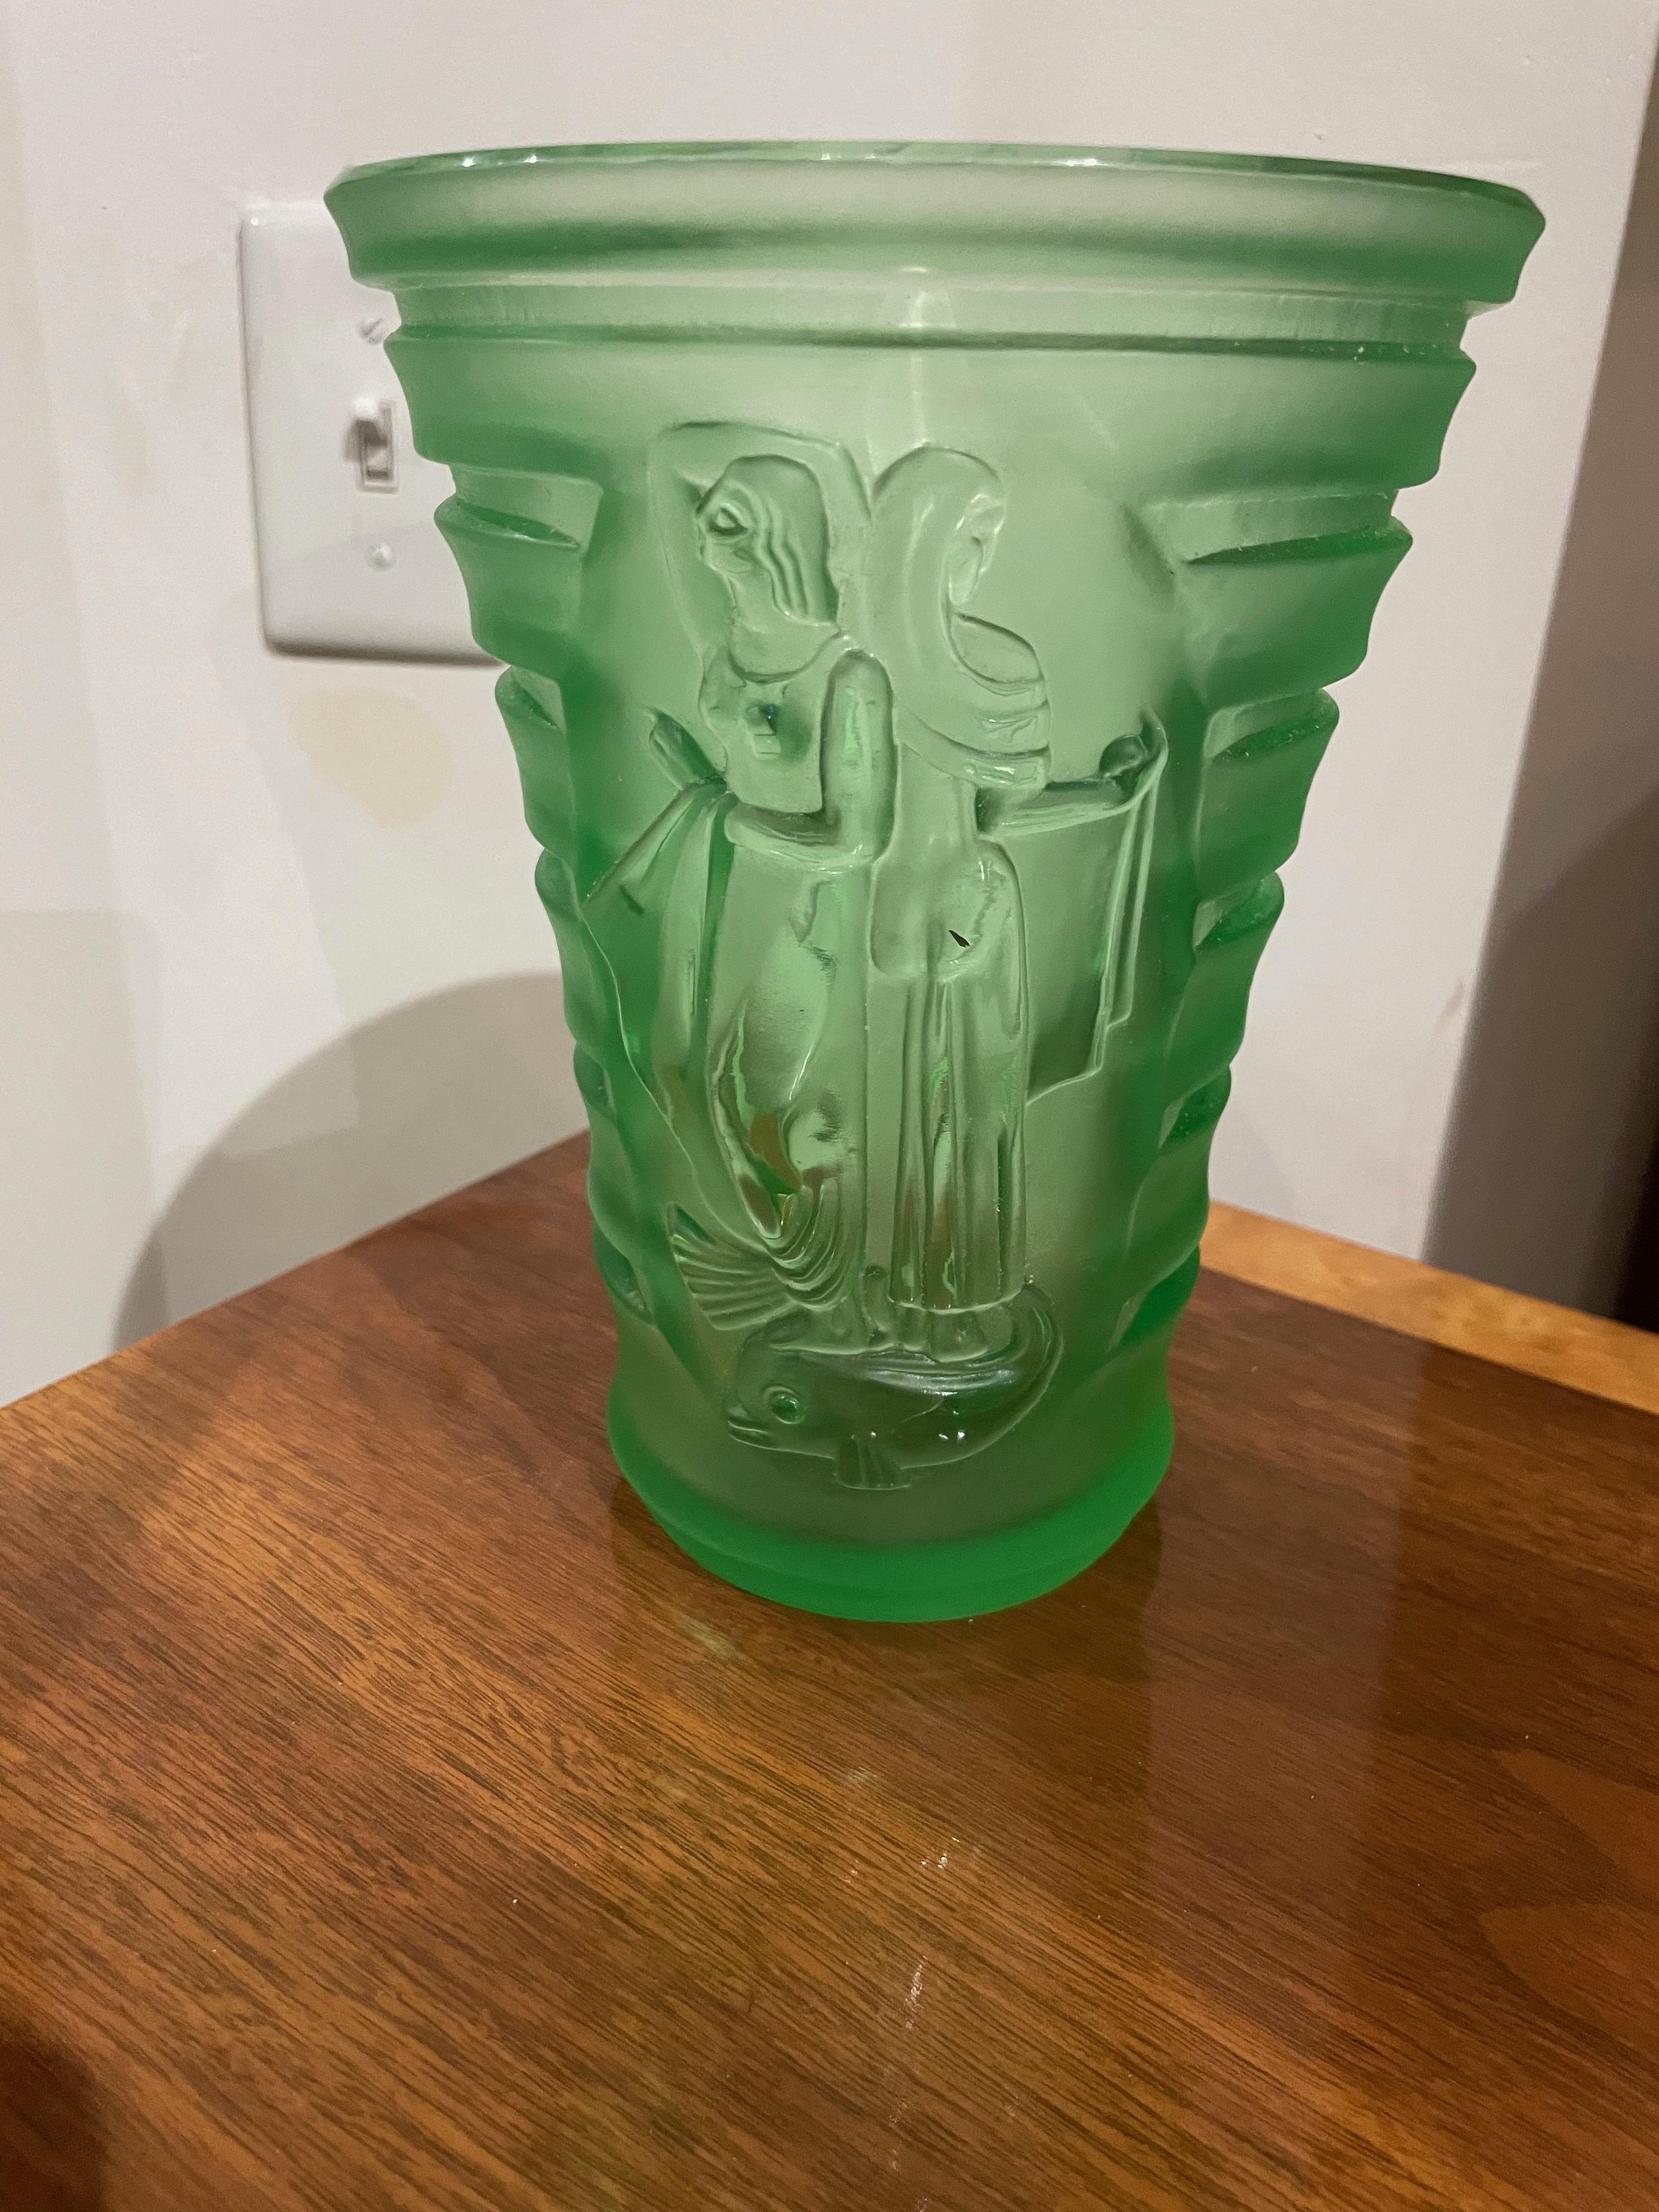 Art Deco carved green glass vase with Woman & Birds. A rare and unique vase with deep carving shows stylized art deco women and birds. The lovely heavy vase would be great with flowers or a display. It is unsigned but most likely from a great Czech